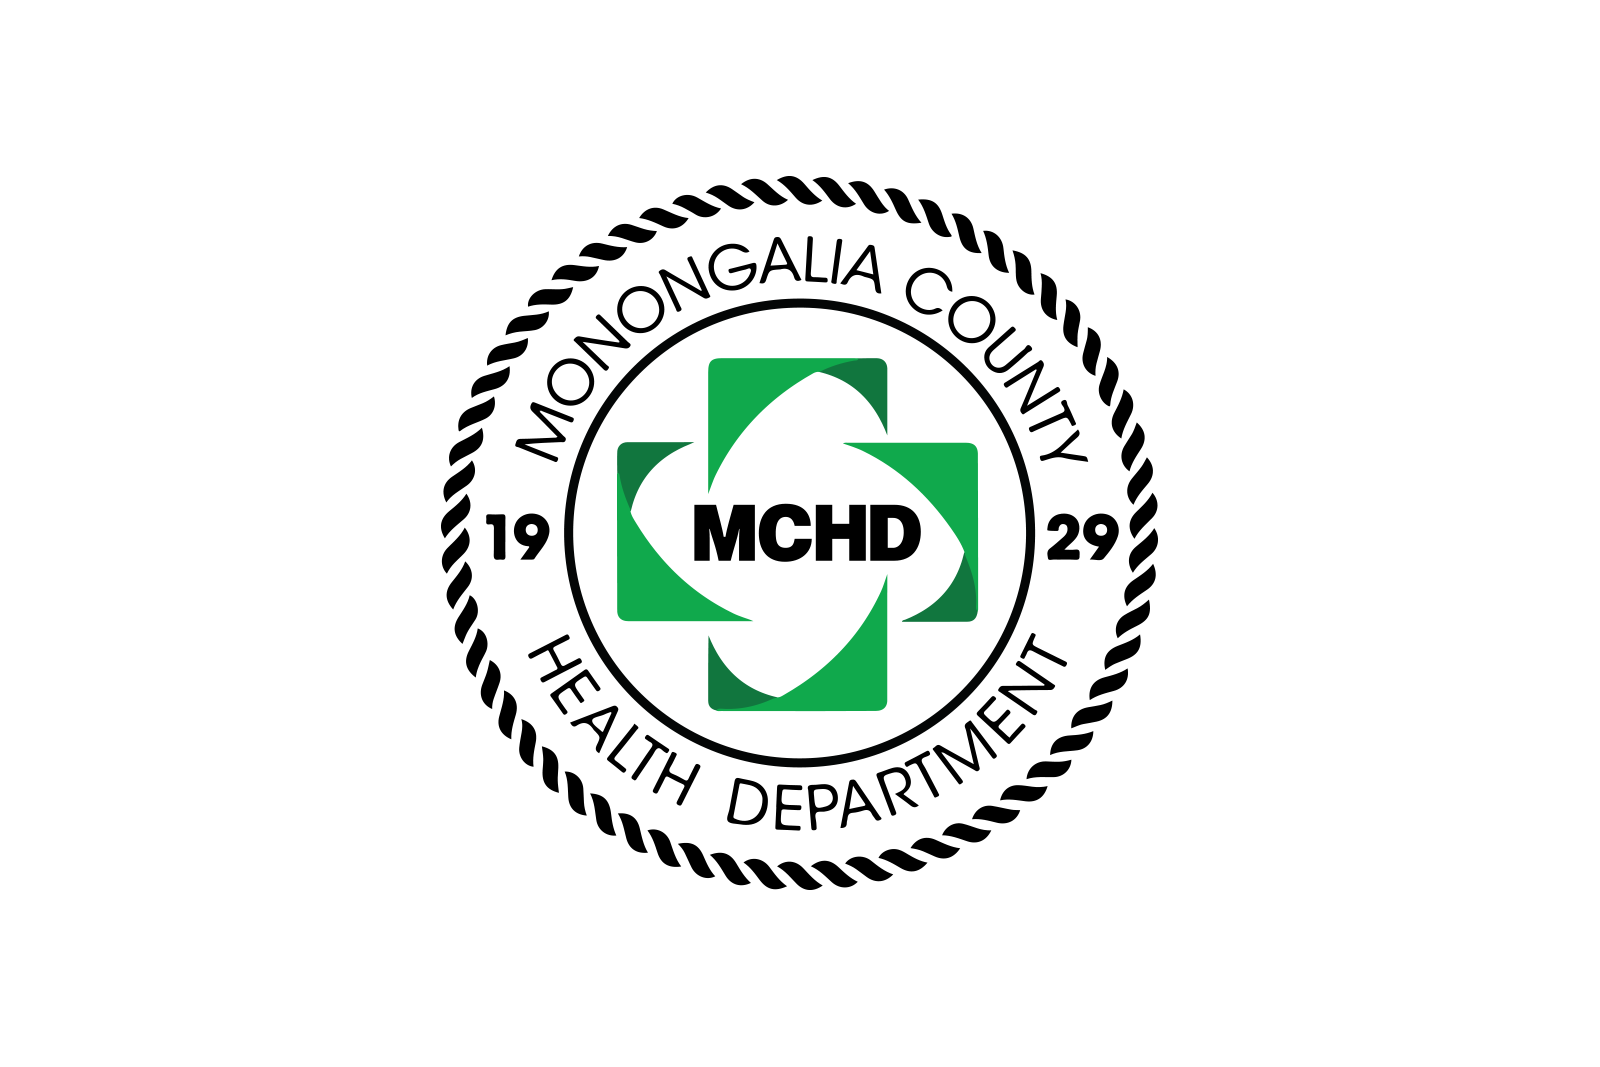 MCHD Board of Health meeting to be held at 9 a.m. March 28